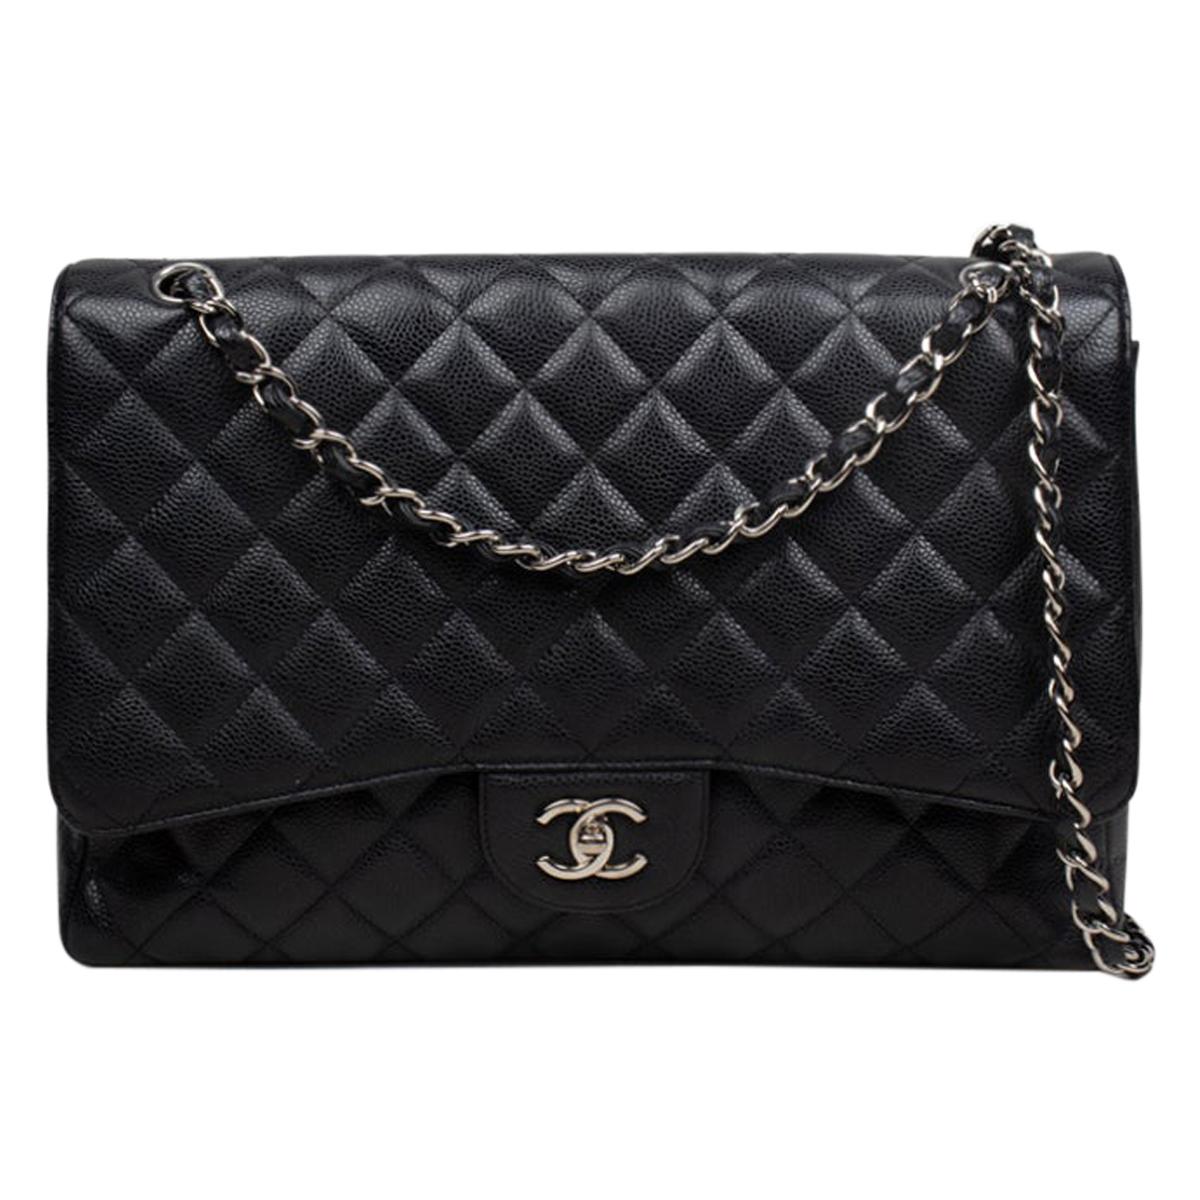 Chanel Boy Ruthenium Finish Medium Black Quilted Leather Bag A67086 ...